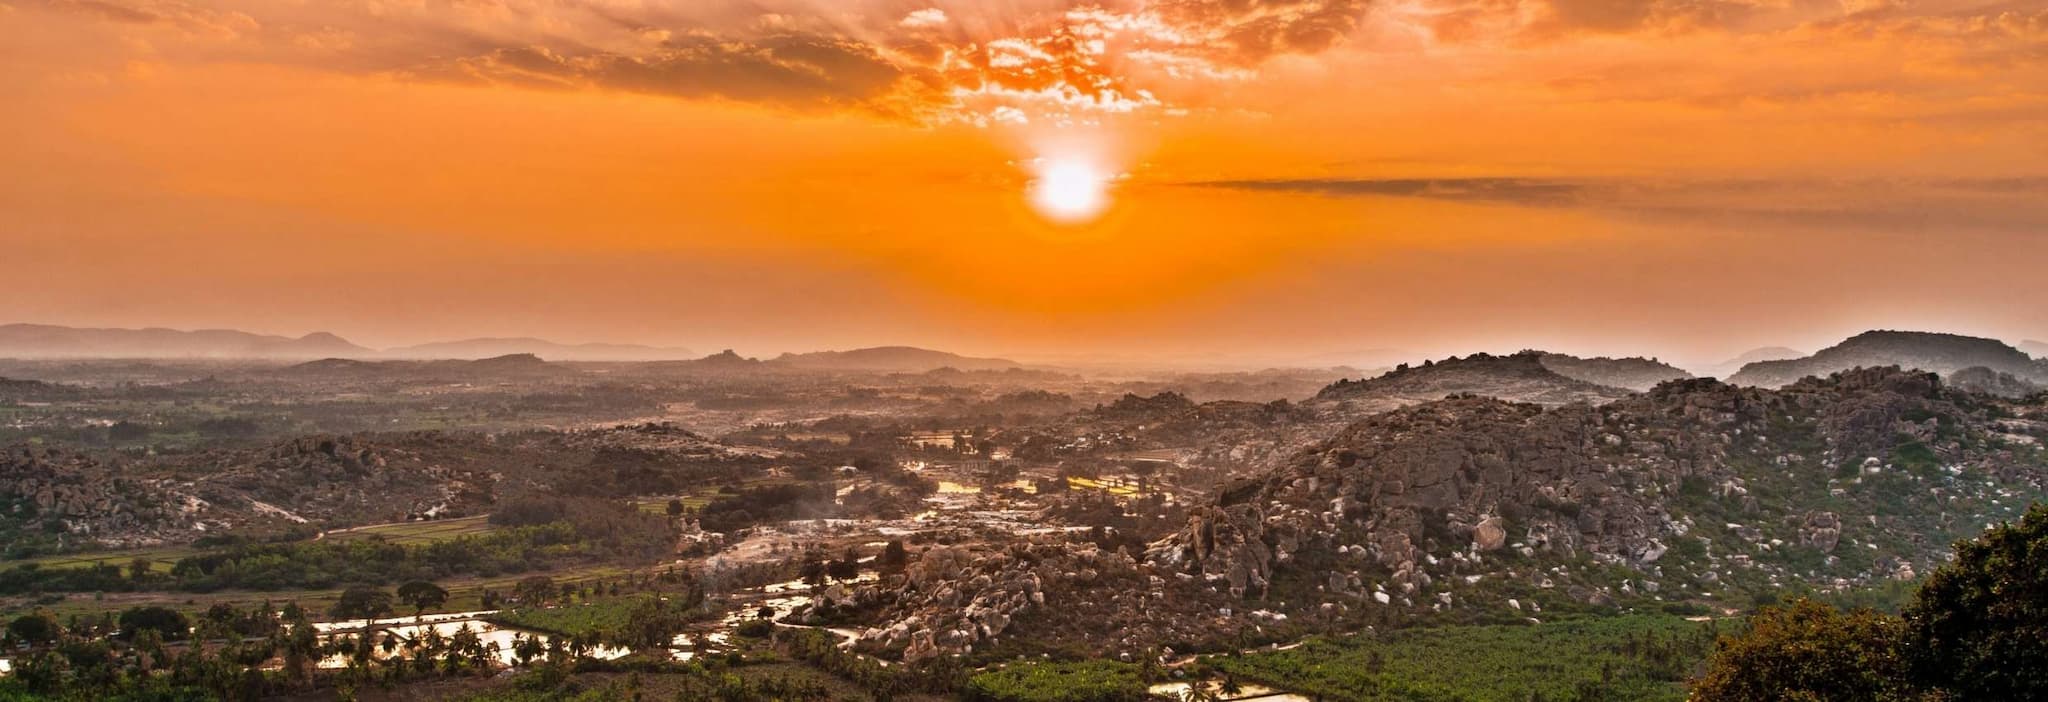 Sunset view over the gigantic boulders atop Anjanadri hill